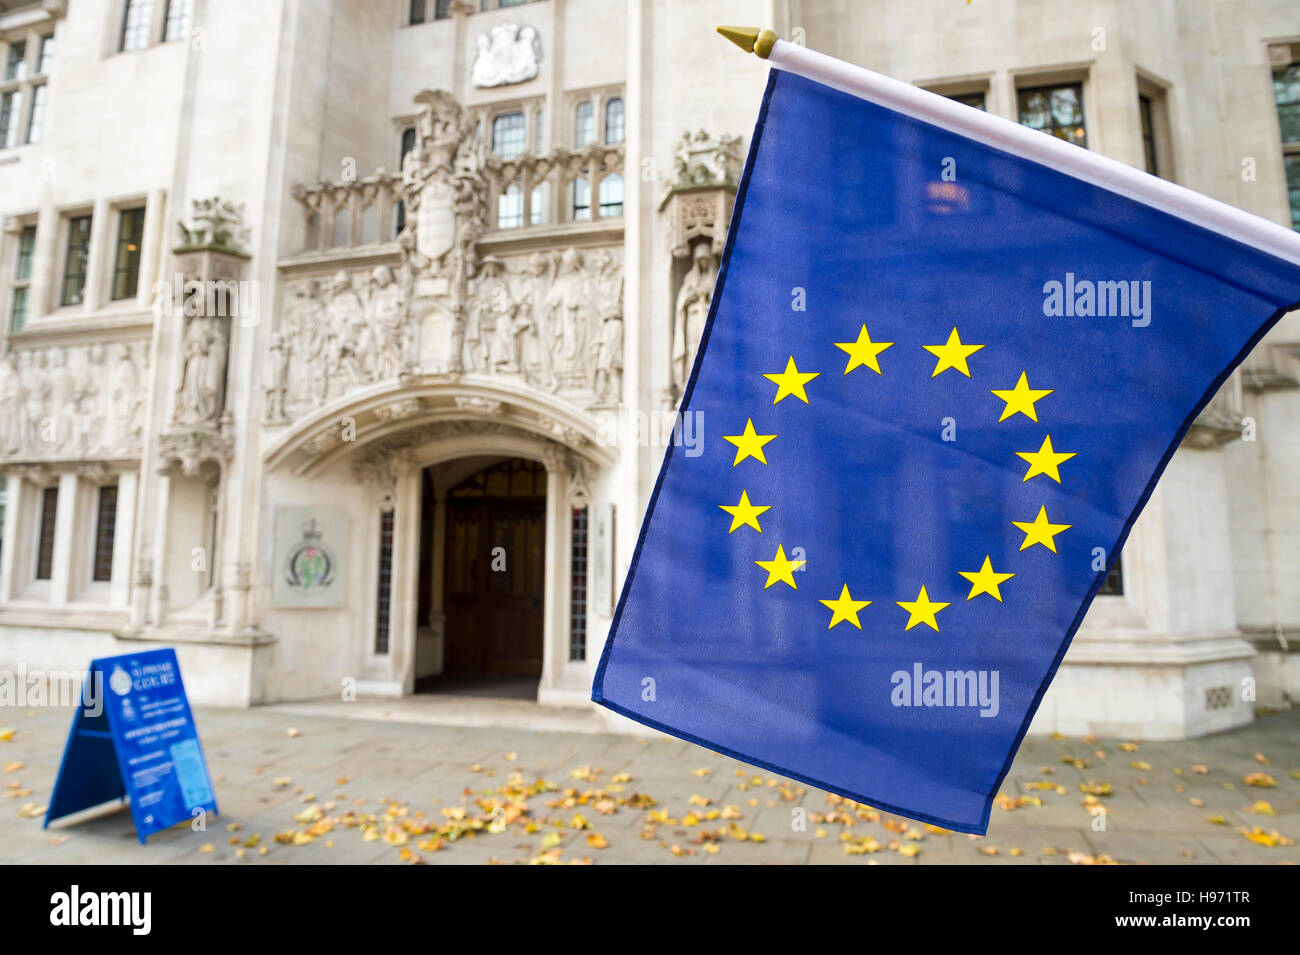 European Union flag flying in front of The Supreme Court of the United Kingdom in the public Middlesex Guildhall building London Stock Photo